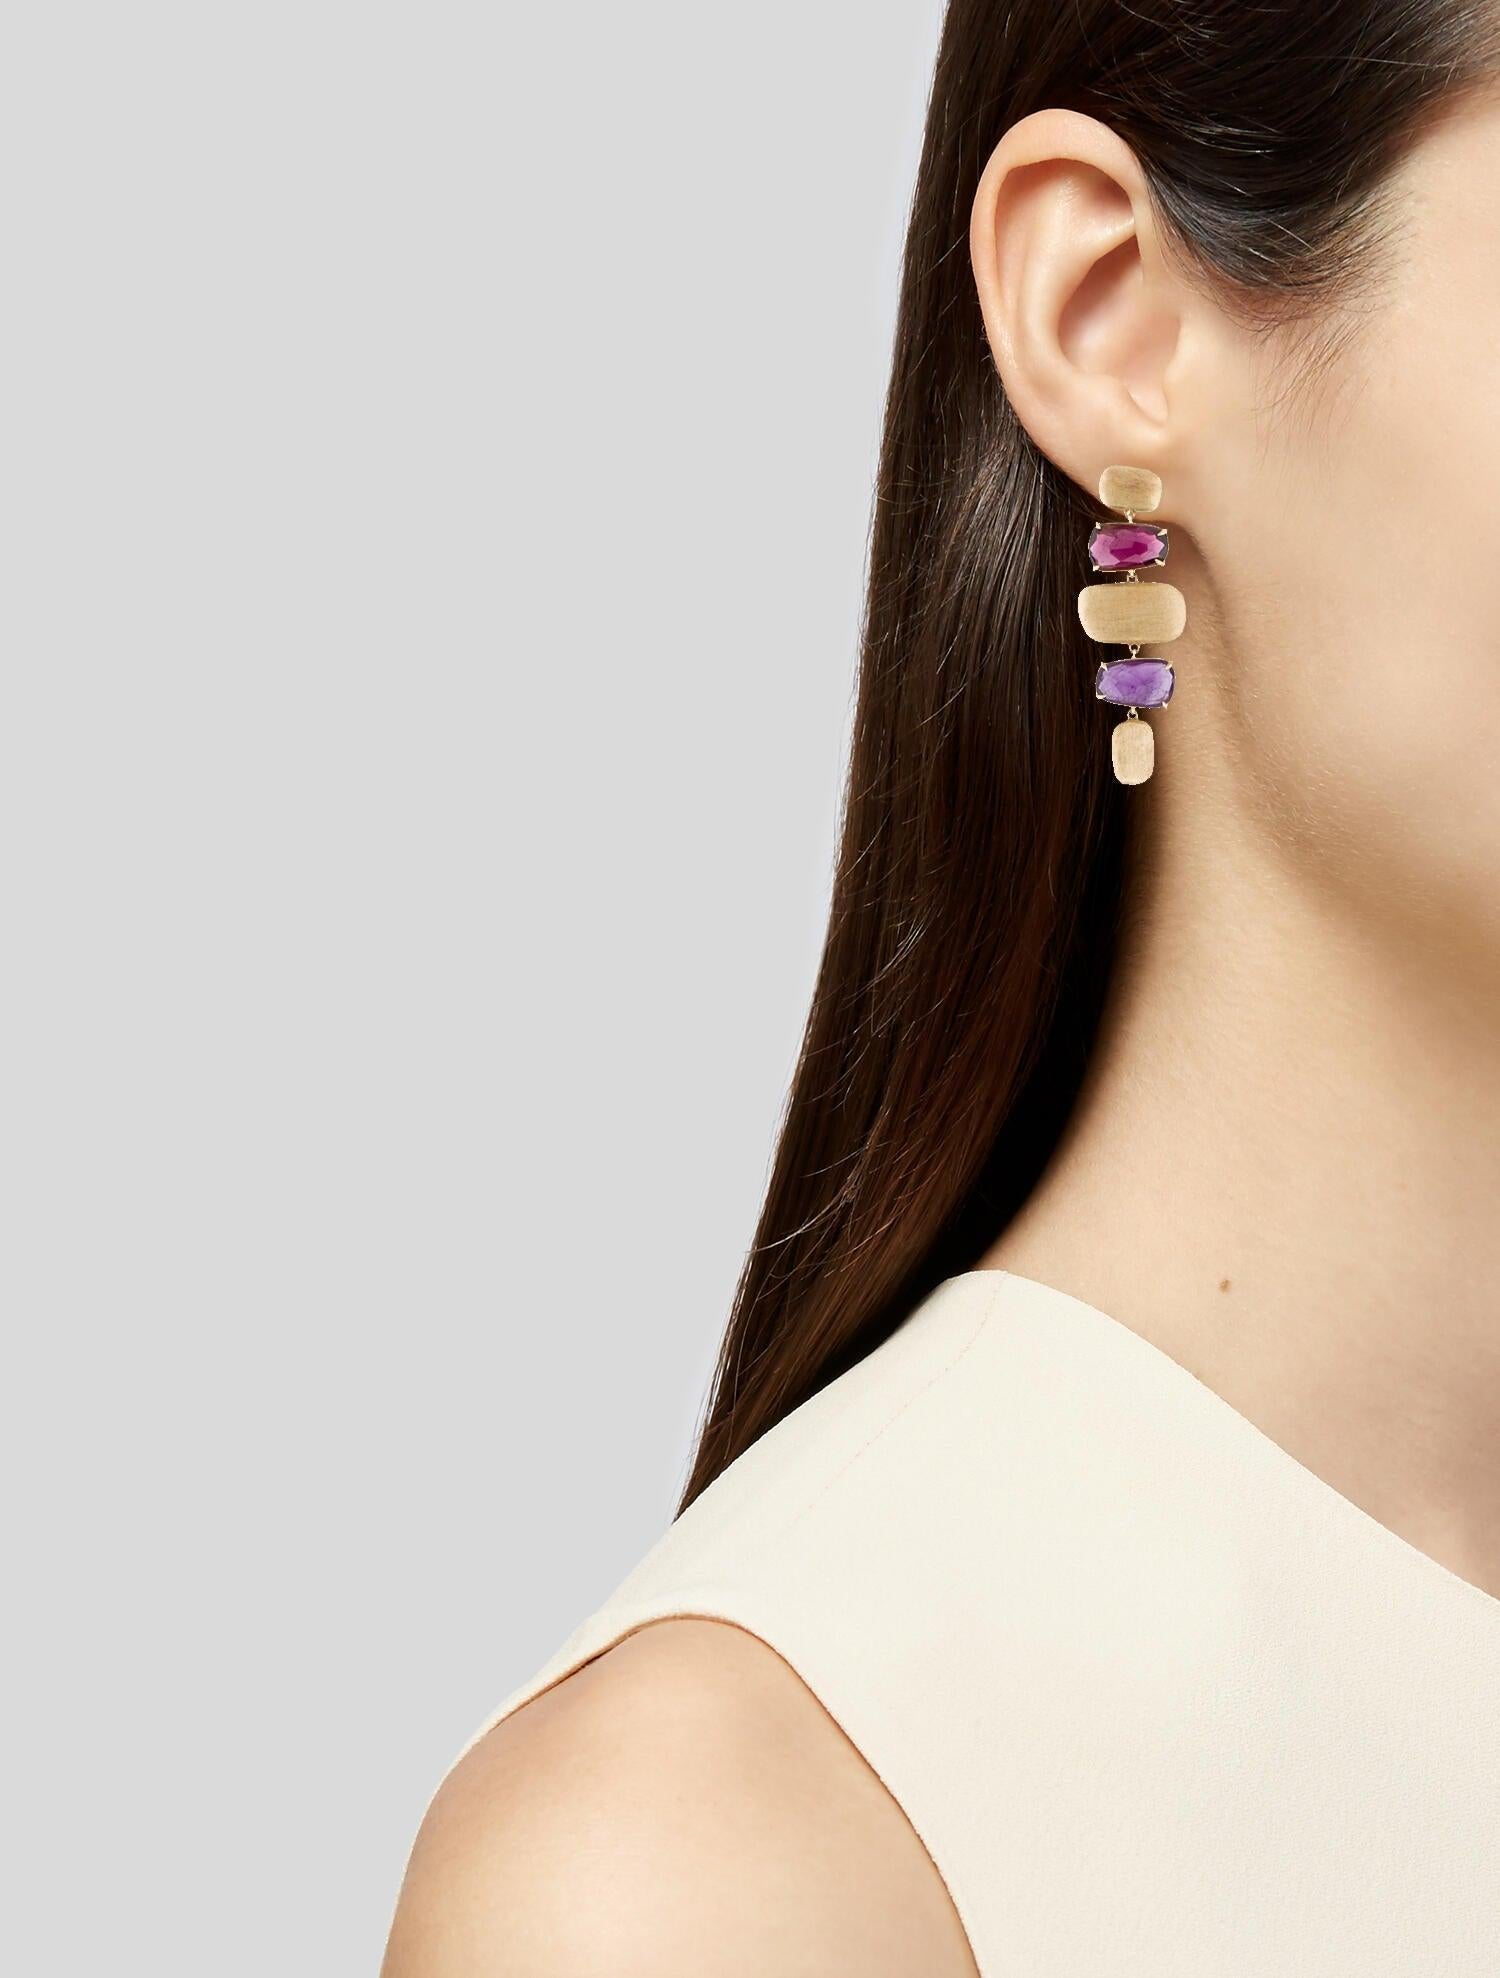 18K yellow gold Marco Bicego Murano drop earrings featuring fancy cut rhodolite and amethyst gemstones with clutch backs.

Metal Type: 18K Yellow Gold
Hallmark: 750, Designer Signature, Registered Trademark Number
Location: Post, Interior